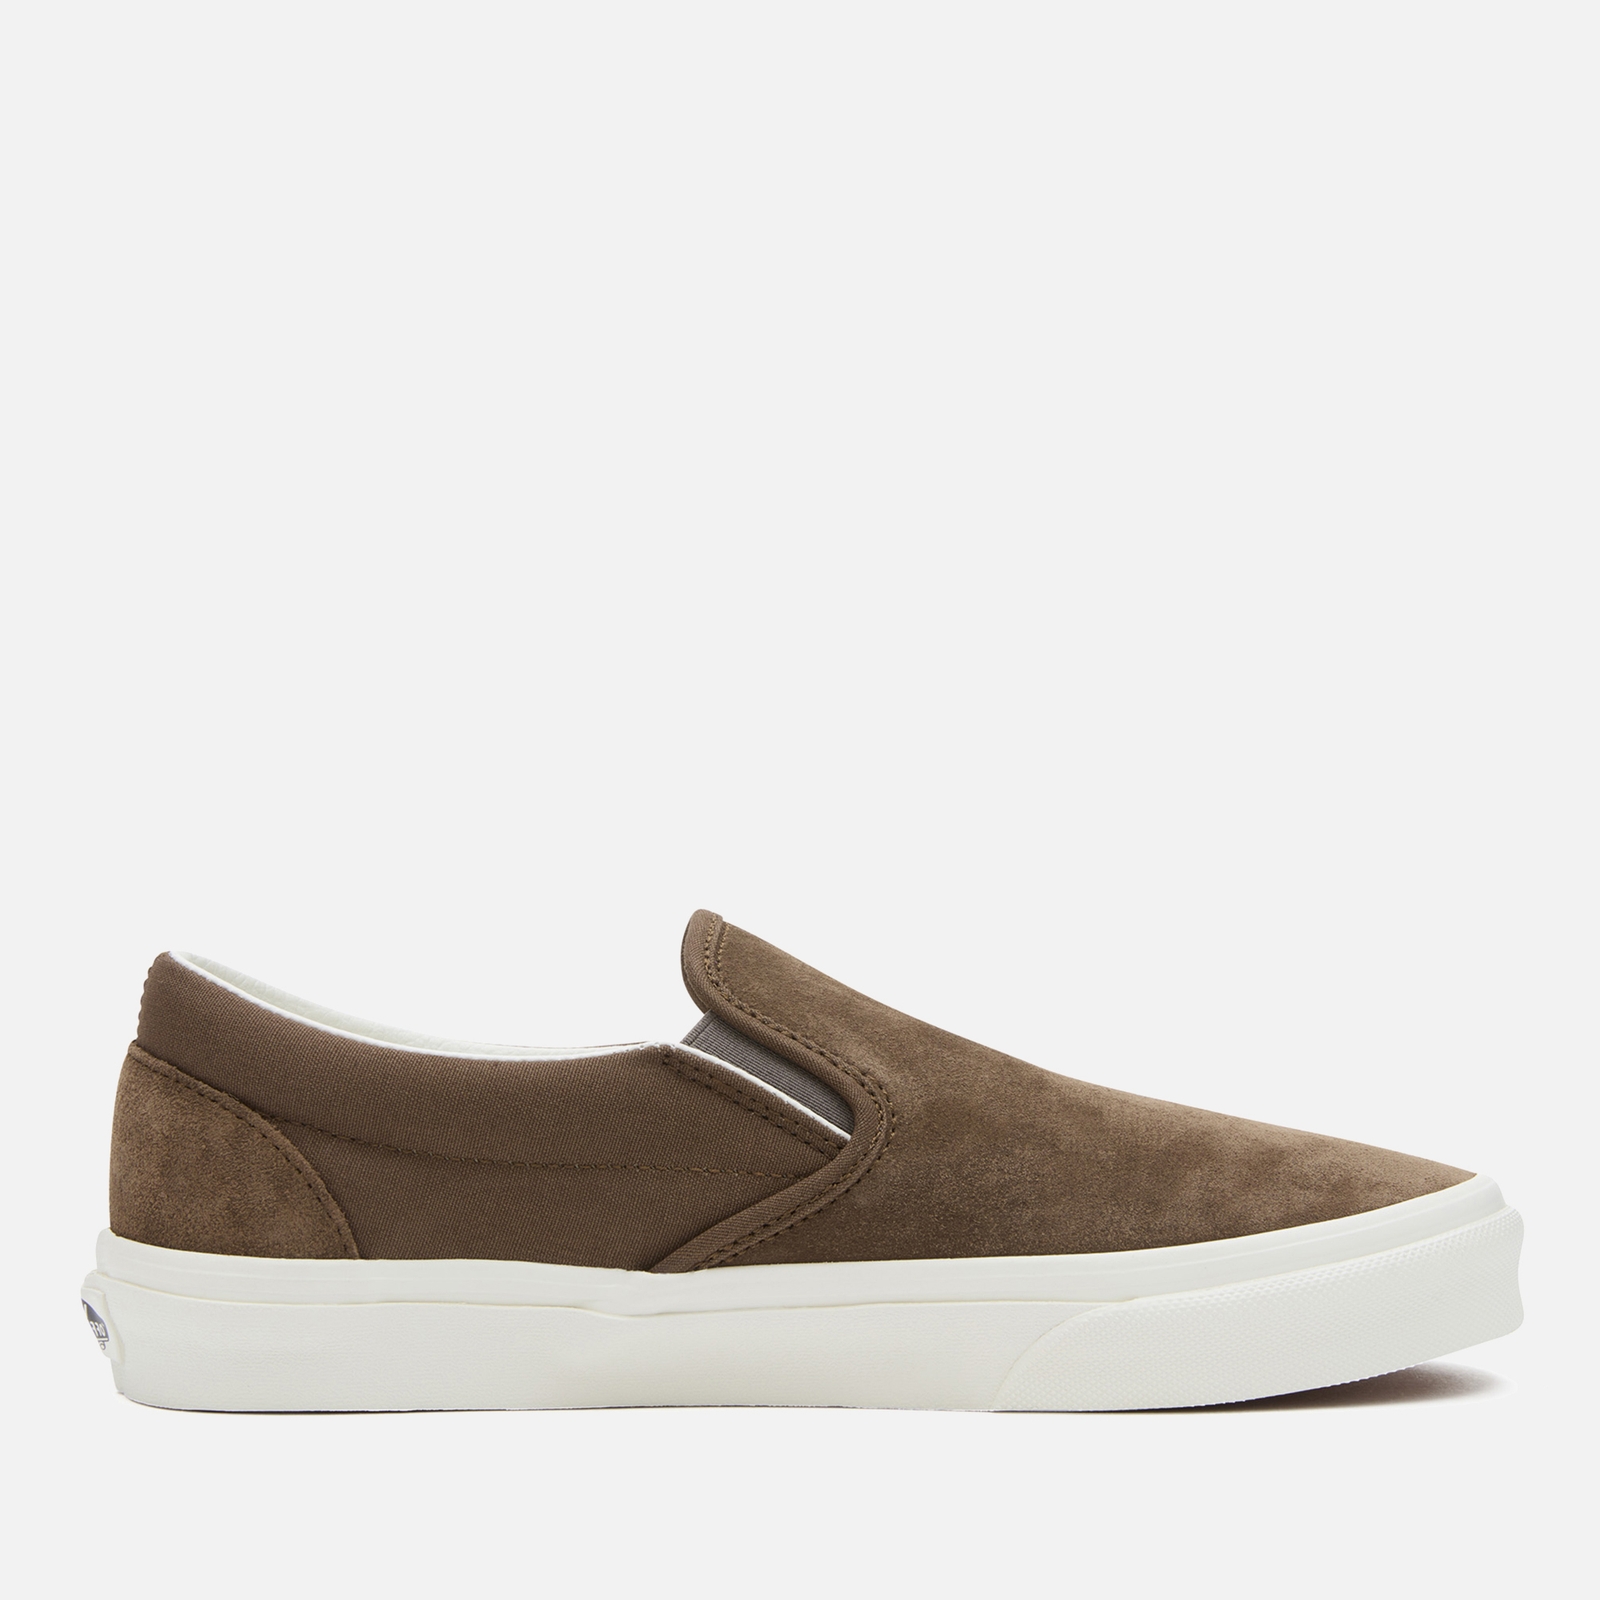 Vans Men's Classic Suede and Canvas Slip On Trainers - UK 7